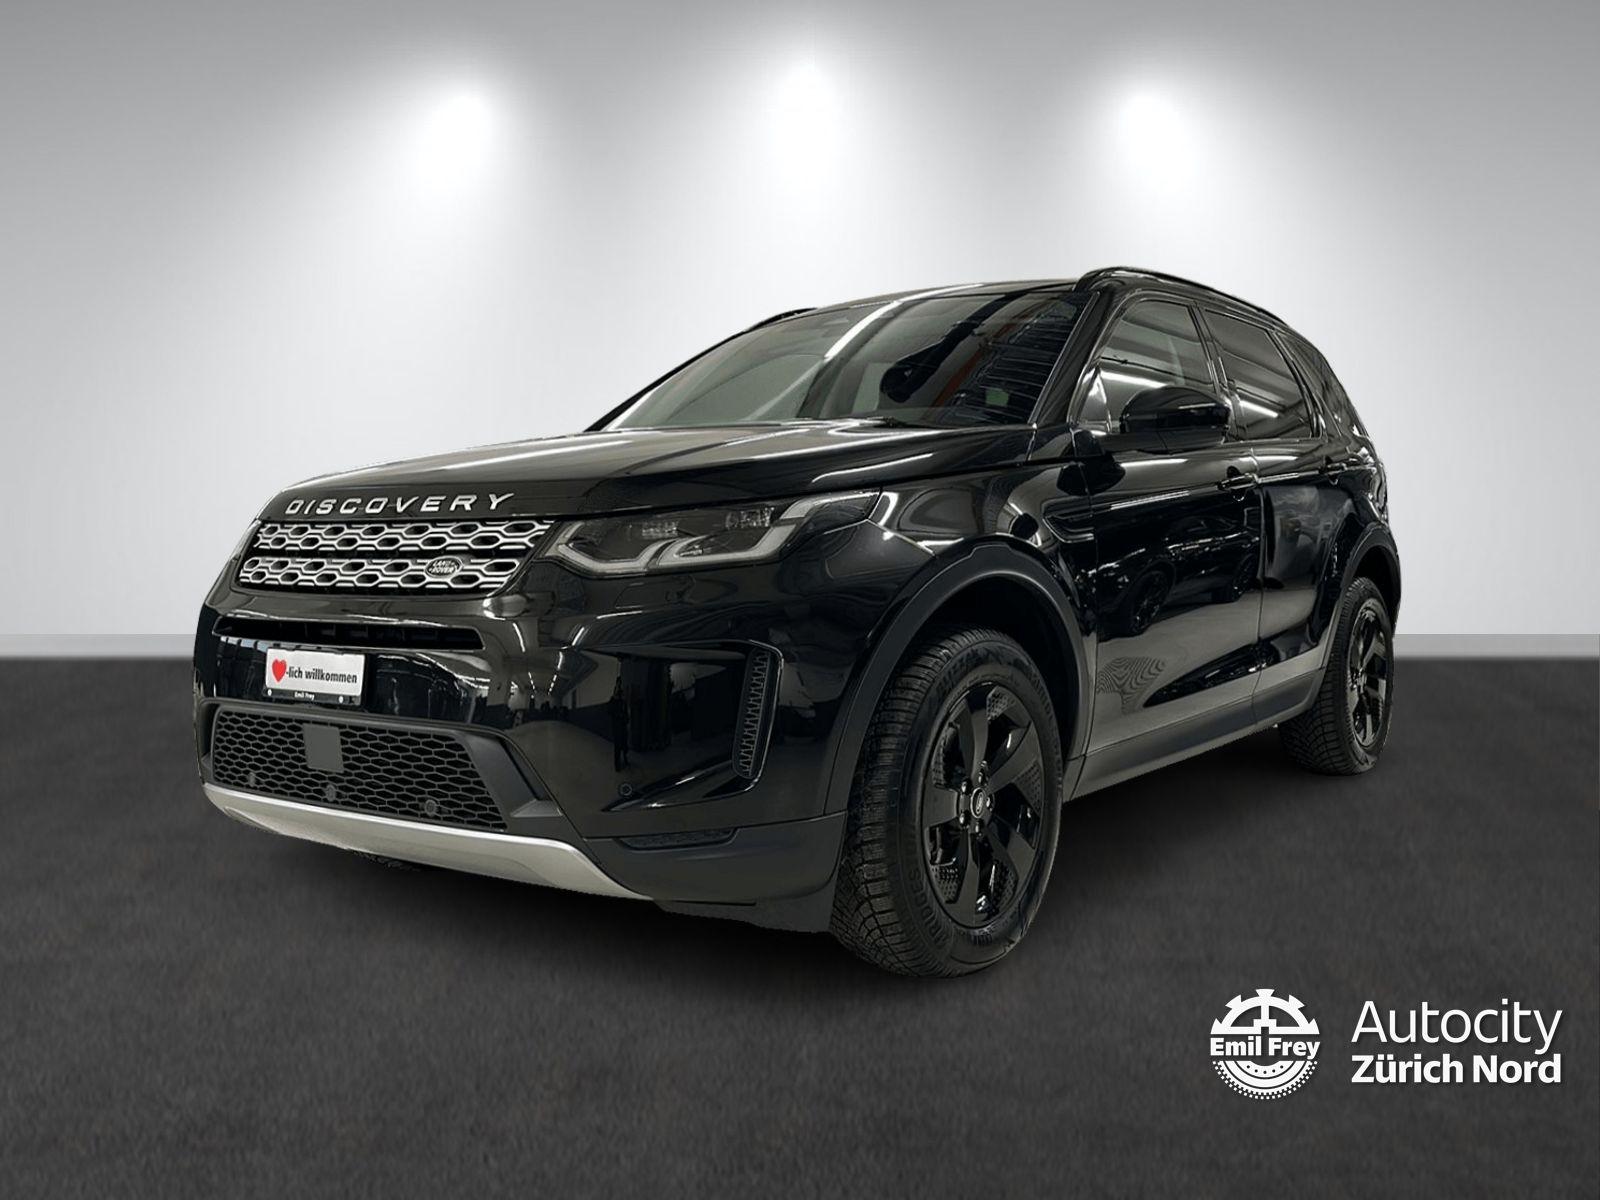 Land Rover Led Willkommen Licht Range Rover Discovery 3 4